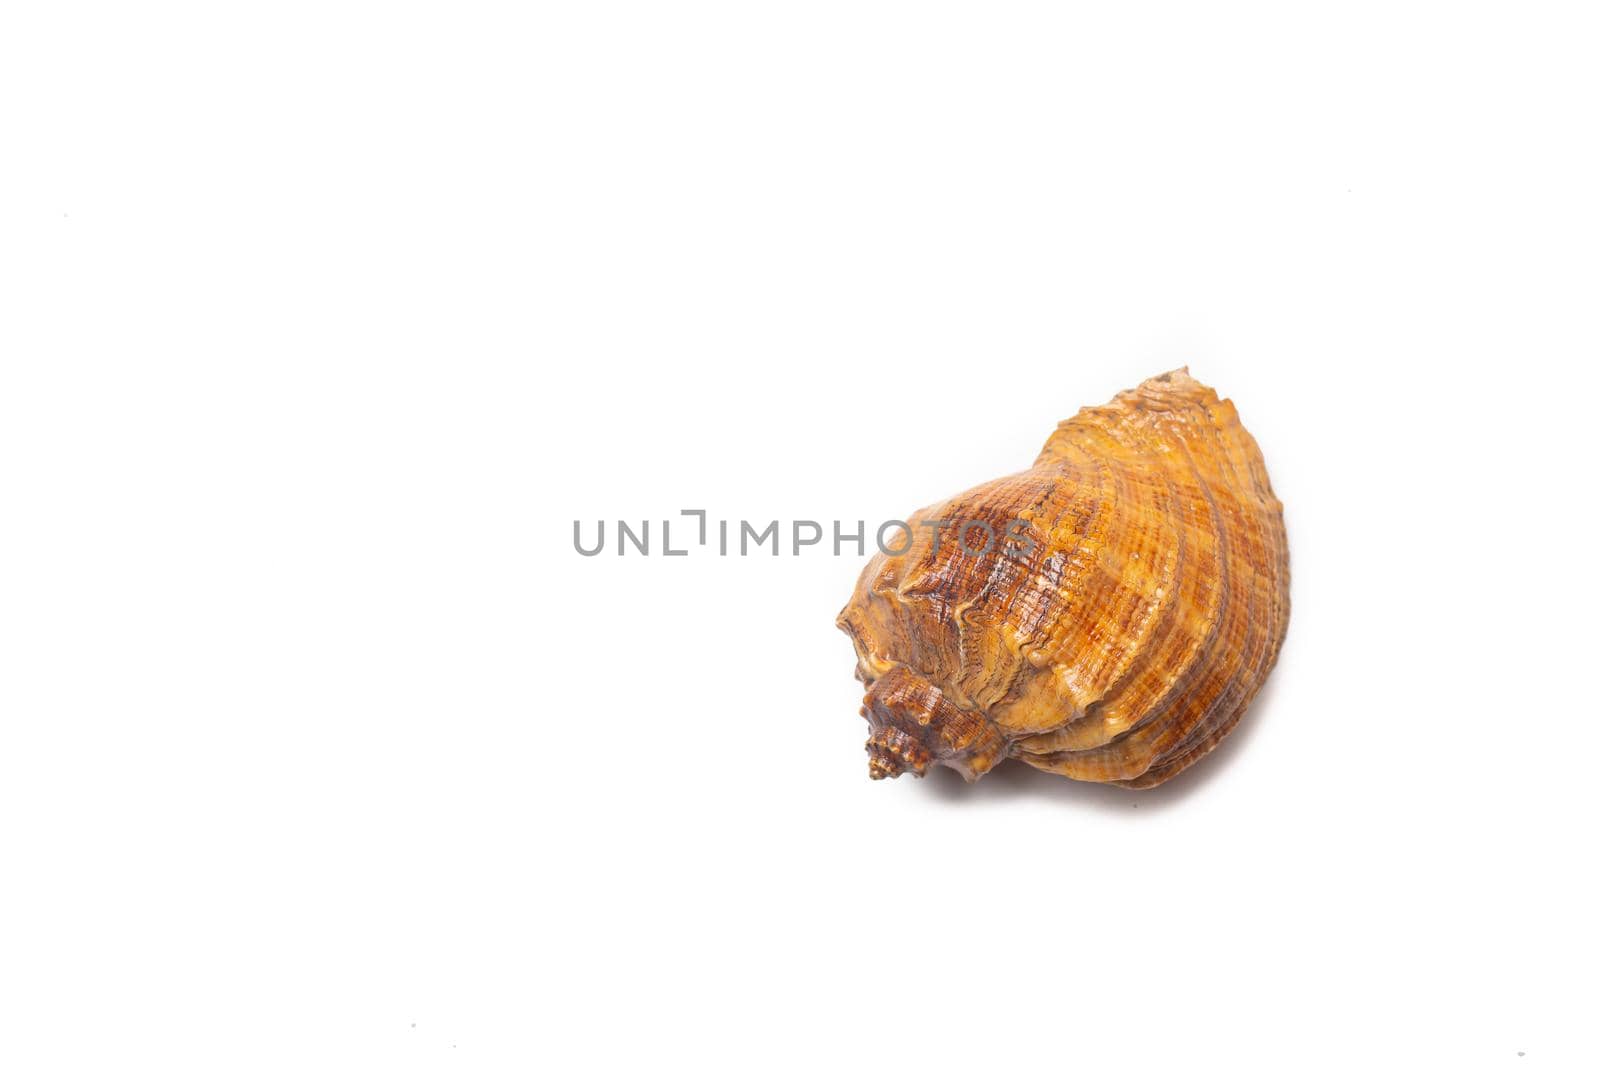 Seashell on a white background . An article about seashells. Vacation at the sea. Shopping by the sea. White background. Isolate . Copy space